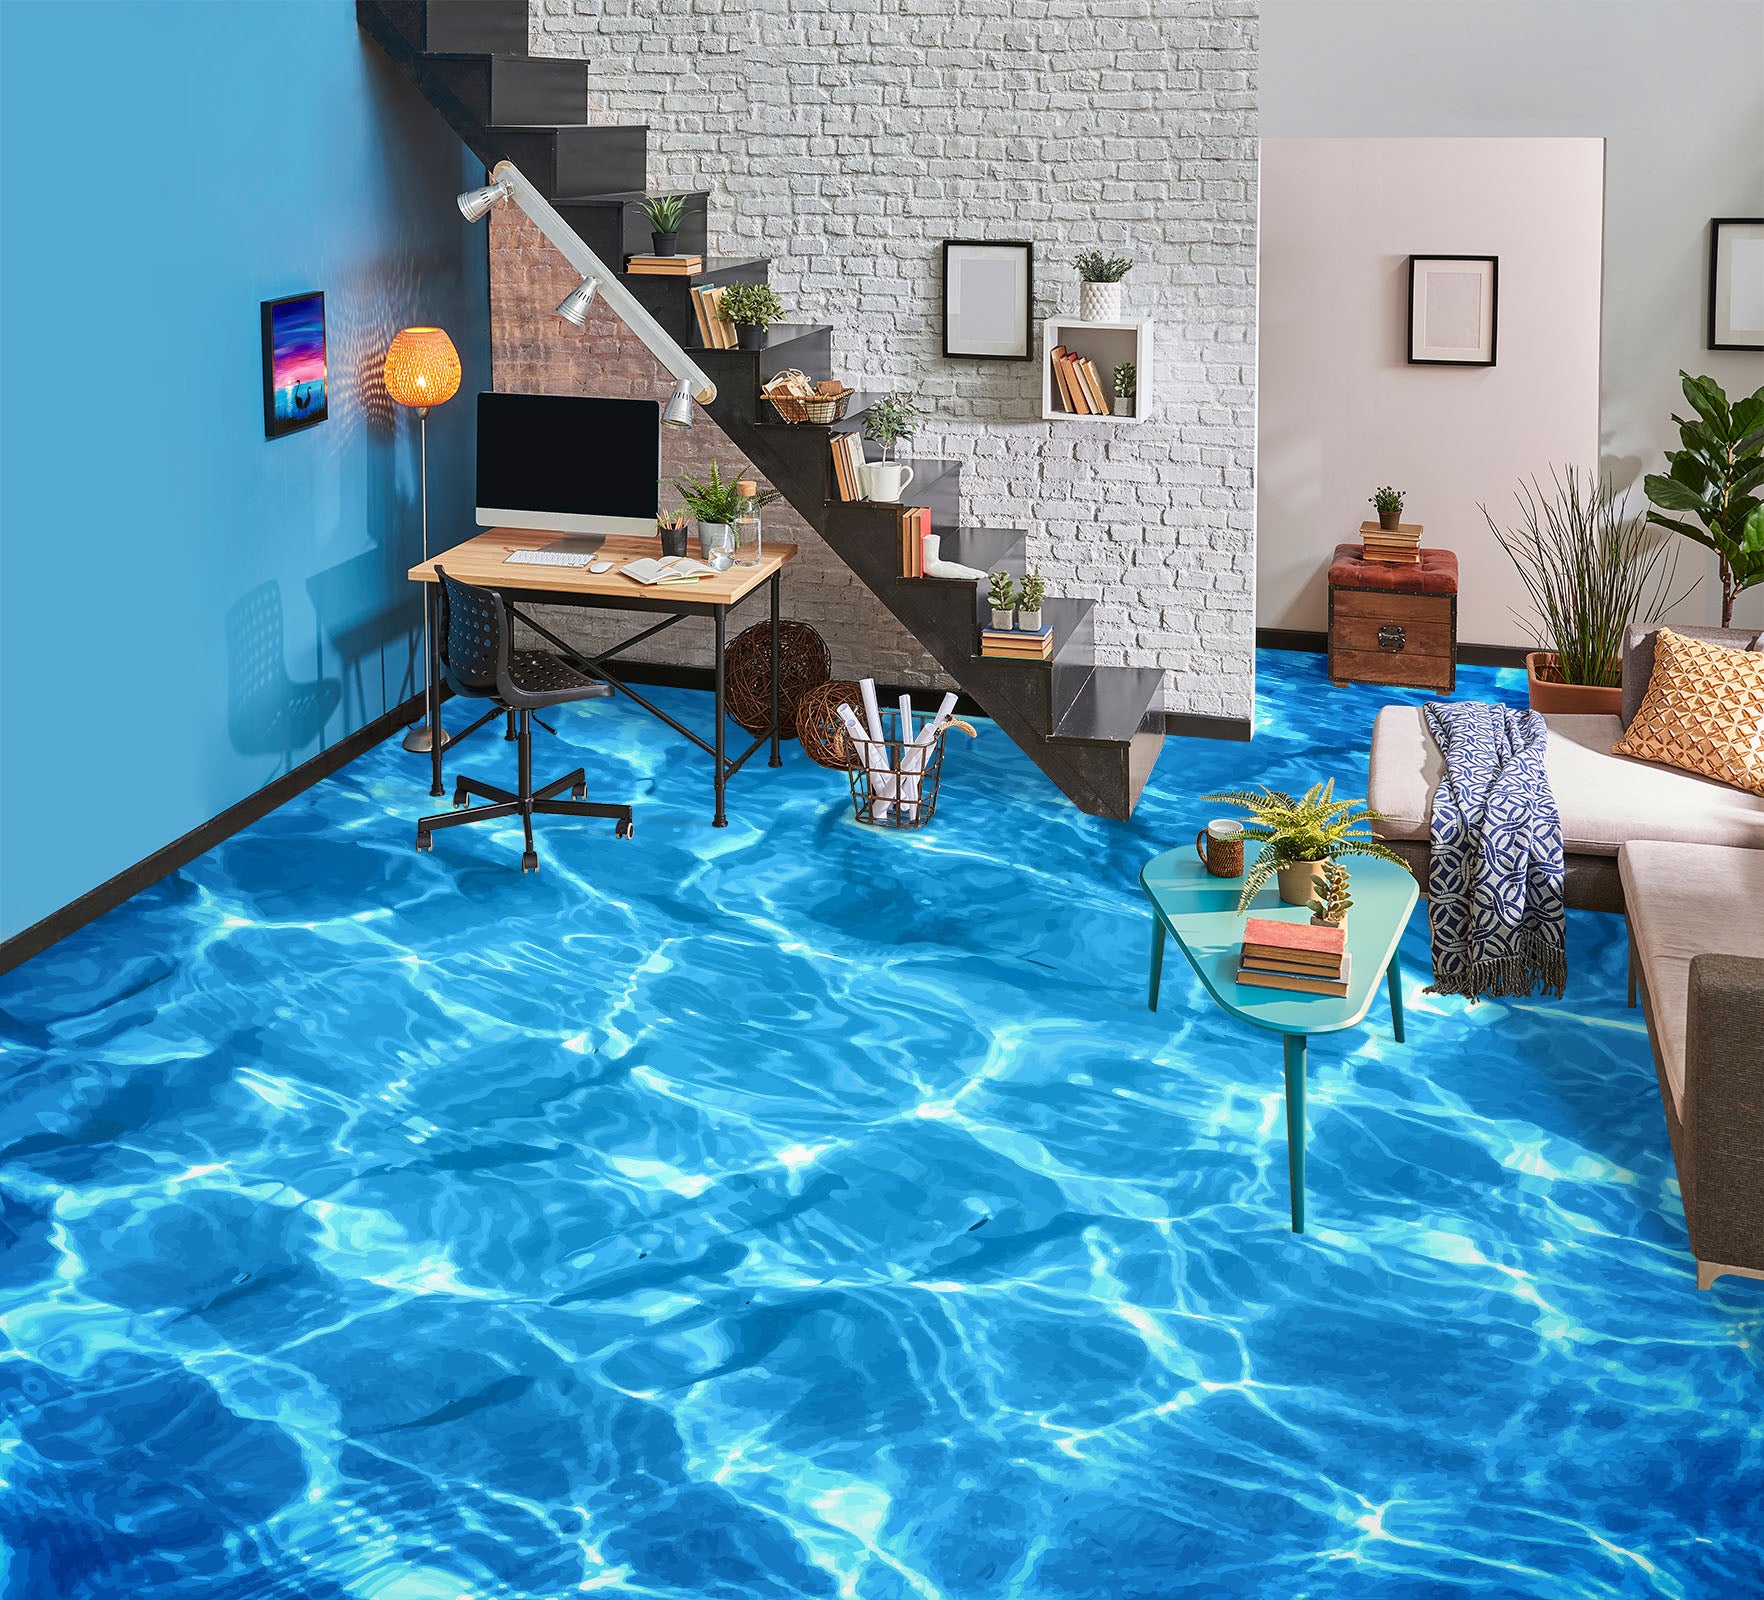 3D Blue Pond Water 1436 Floor Mural  Wallpaper Murals Self-Adhesive Removable Print Epoxy